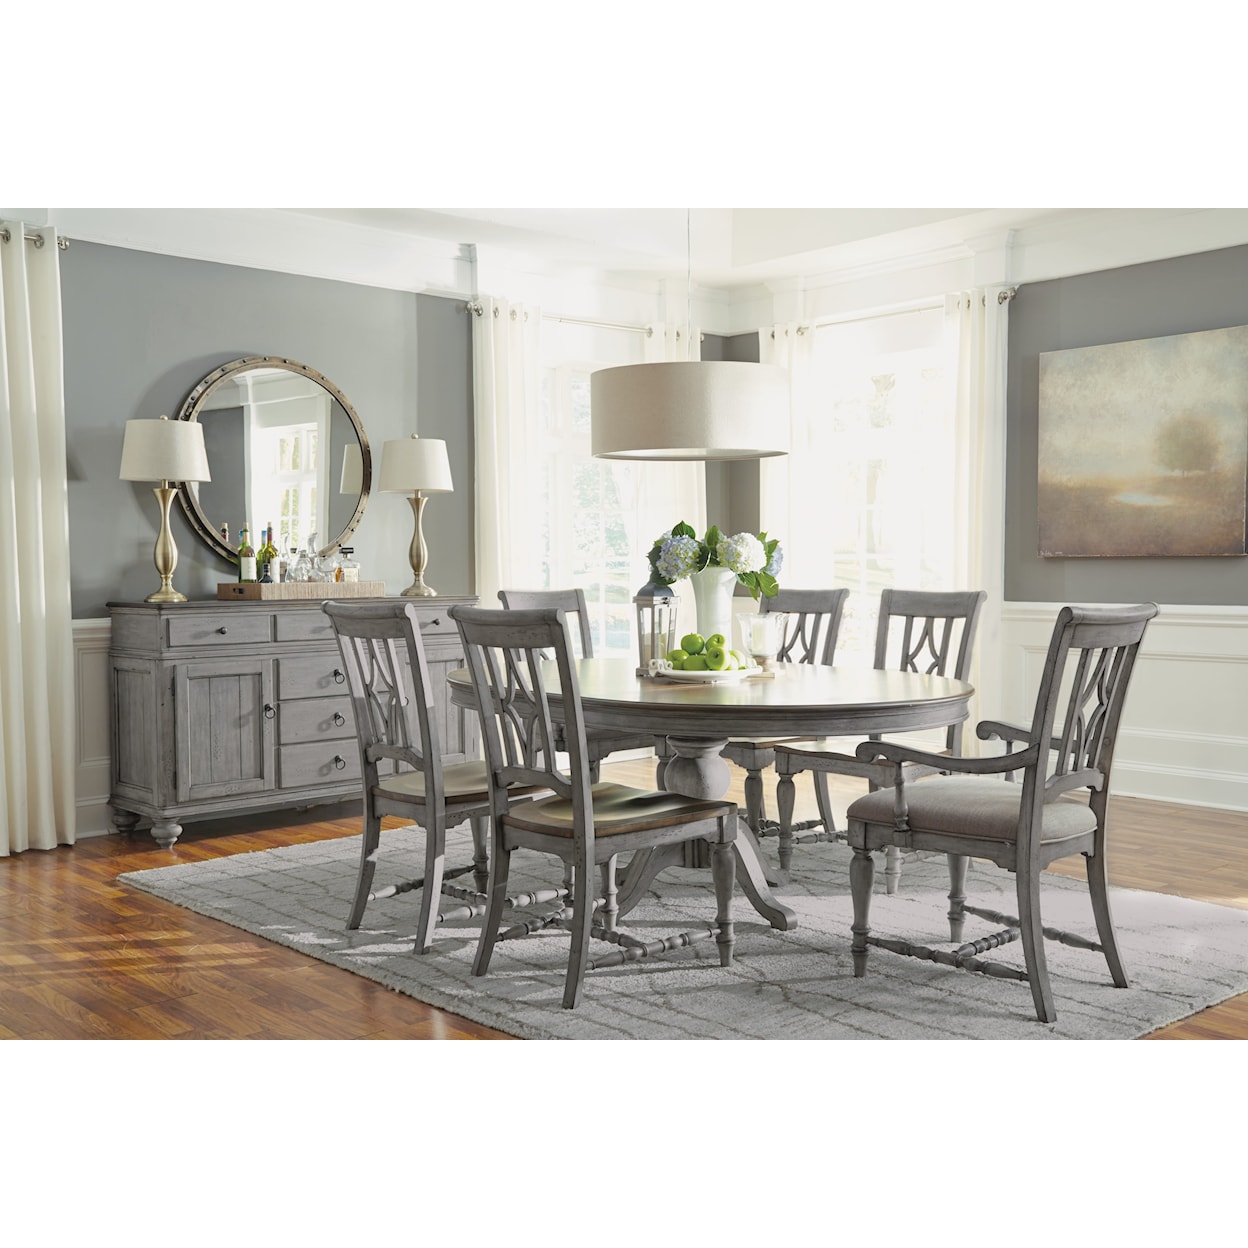 Flexsteel Casegoods Plymouth Dining Room Group